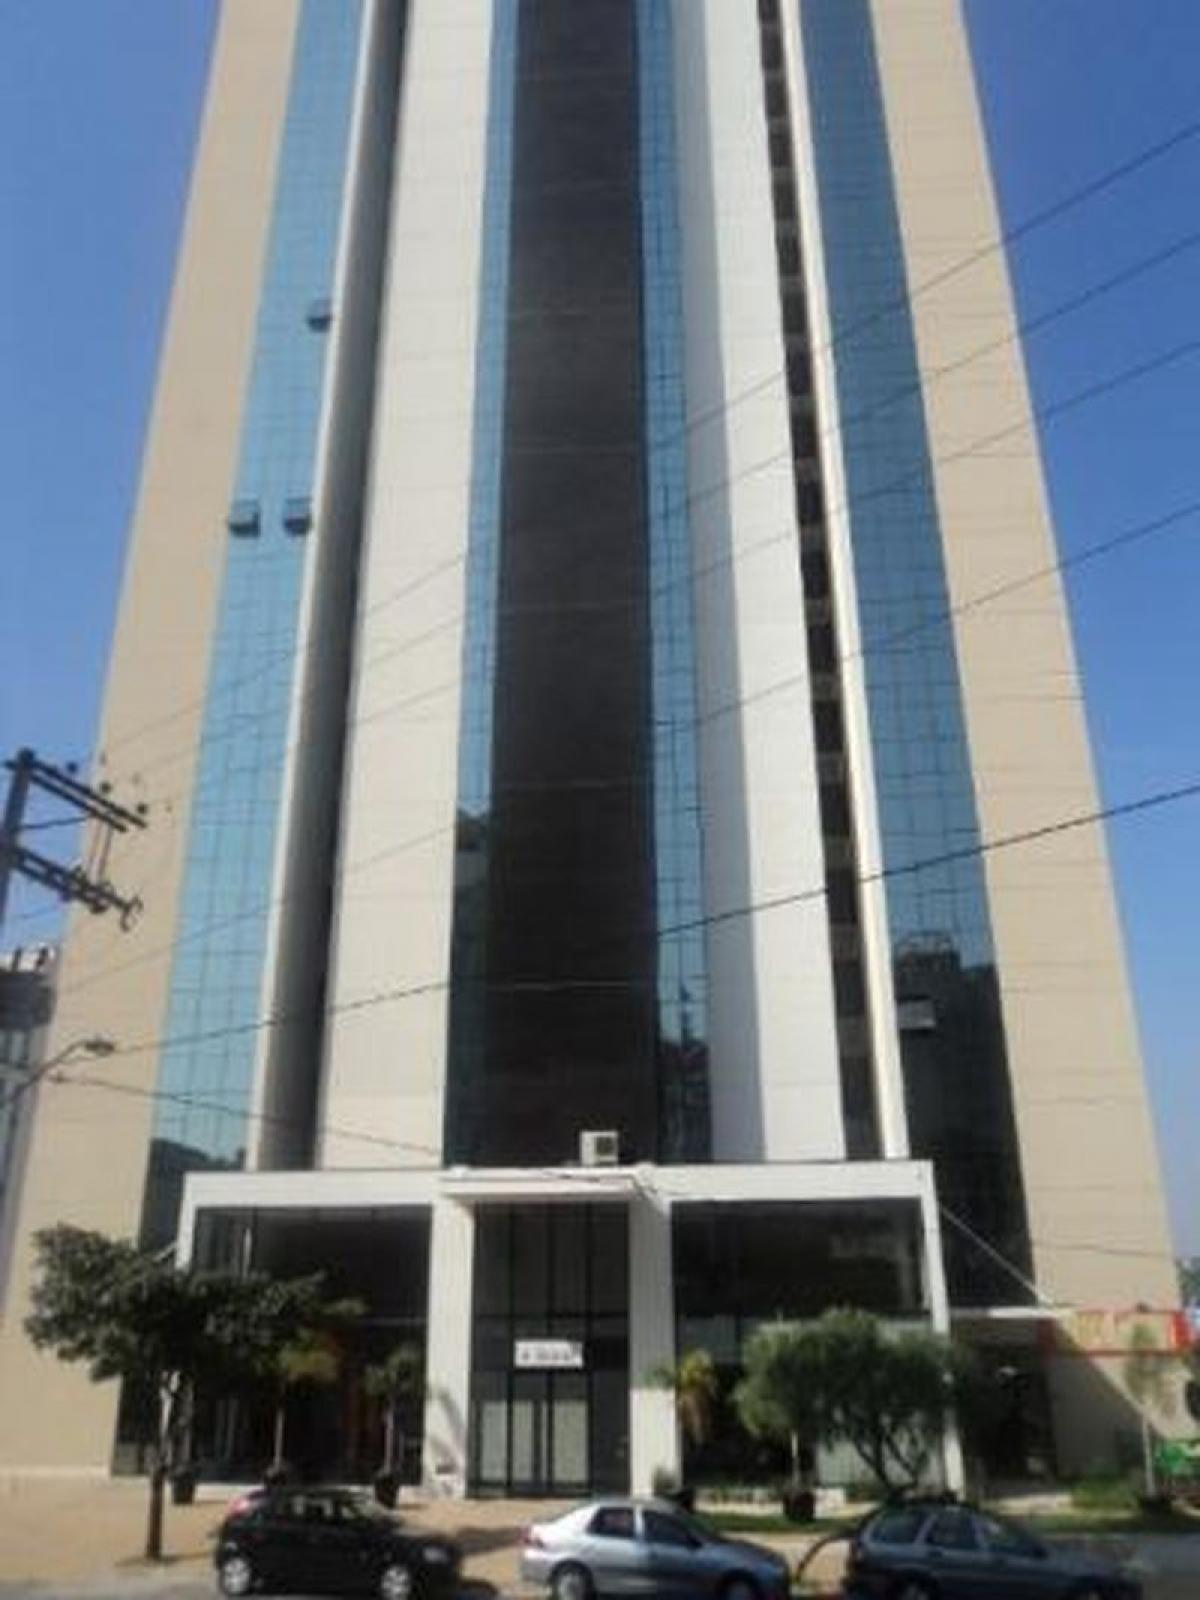 Picture of Commercial Building For Sale in Sorocaba, Sao Paulo, Brazil